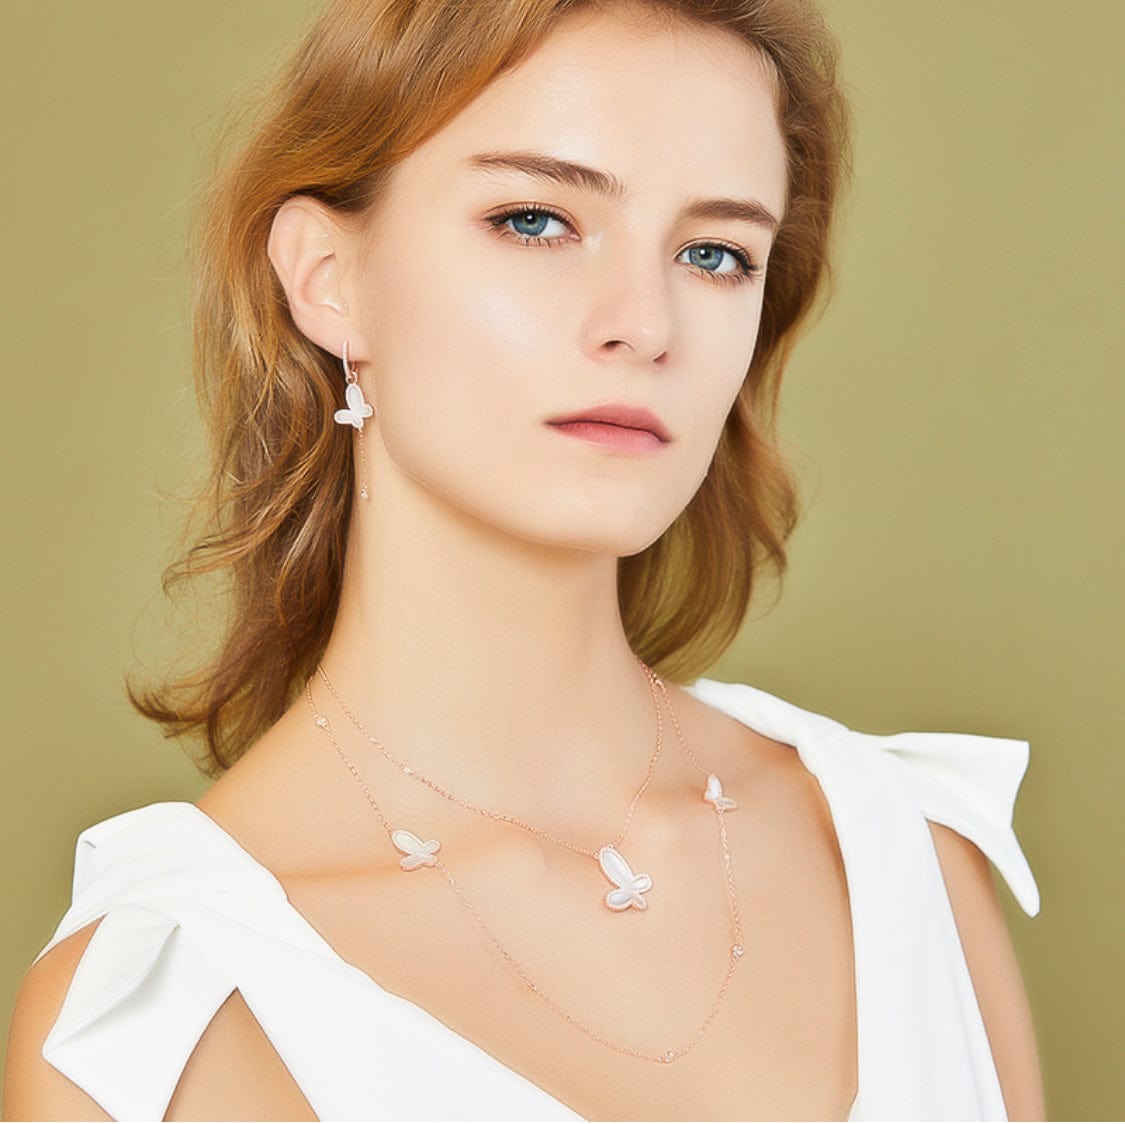 Color Shiny Butterfly Necklace Female Exquisite Double Layer Pendant  Clavicle Chain Necklace Wedding Party Jewelry Gifts - Walmart.com